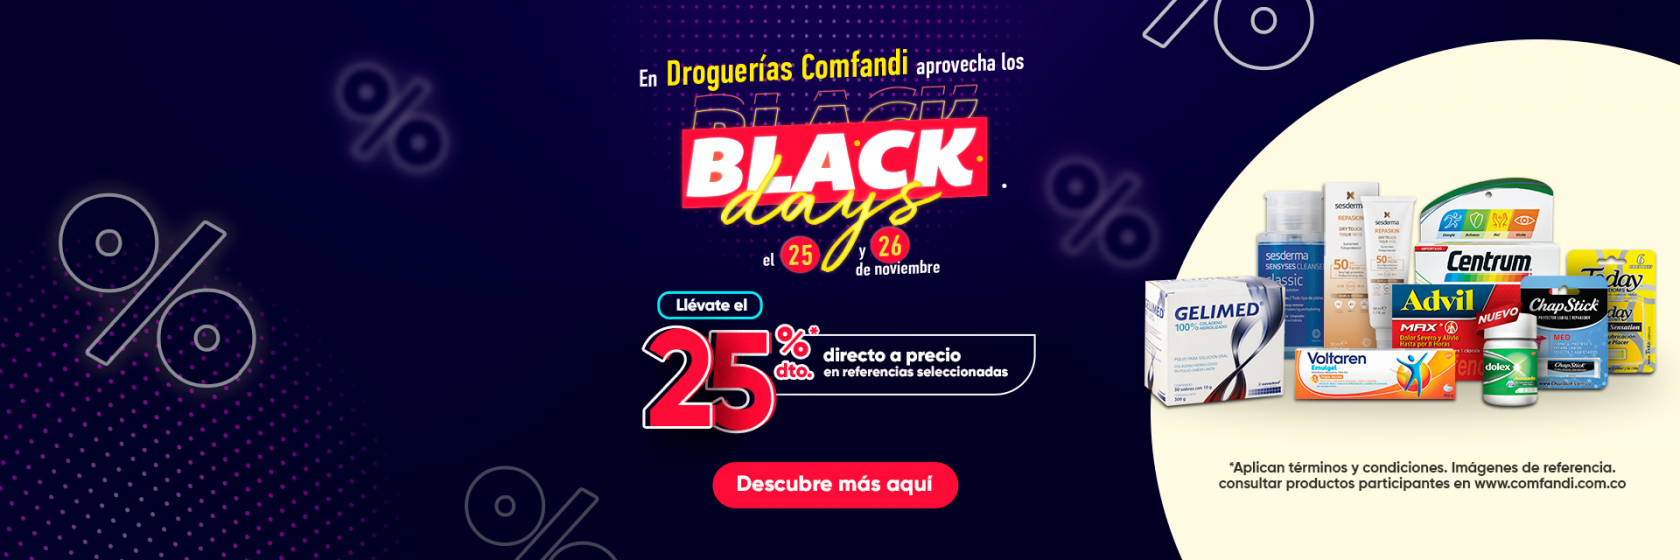 Black friday 25%dto ref select